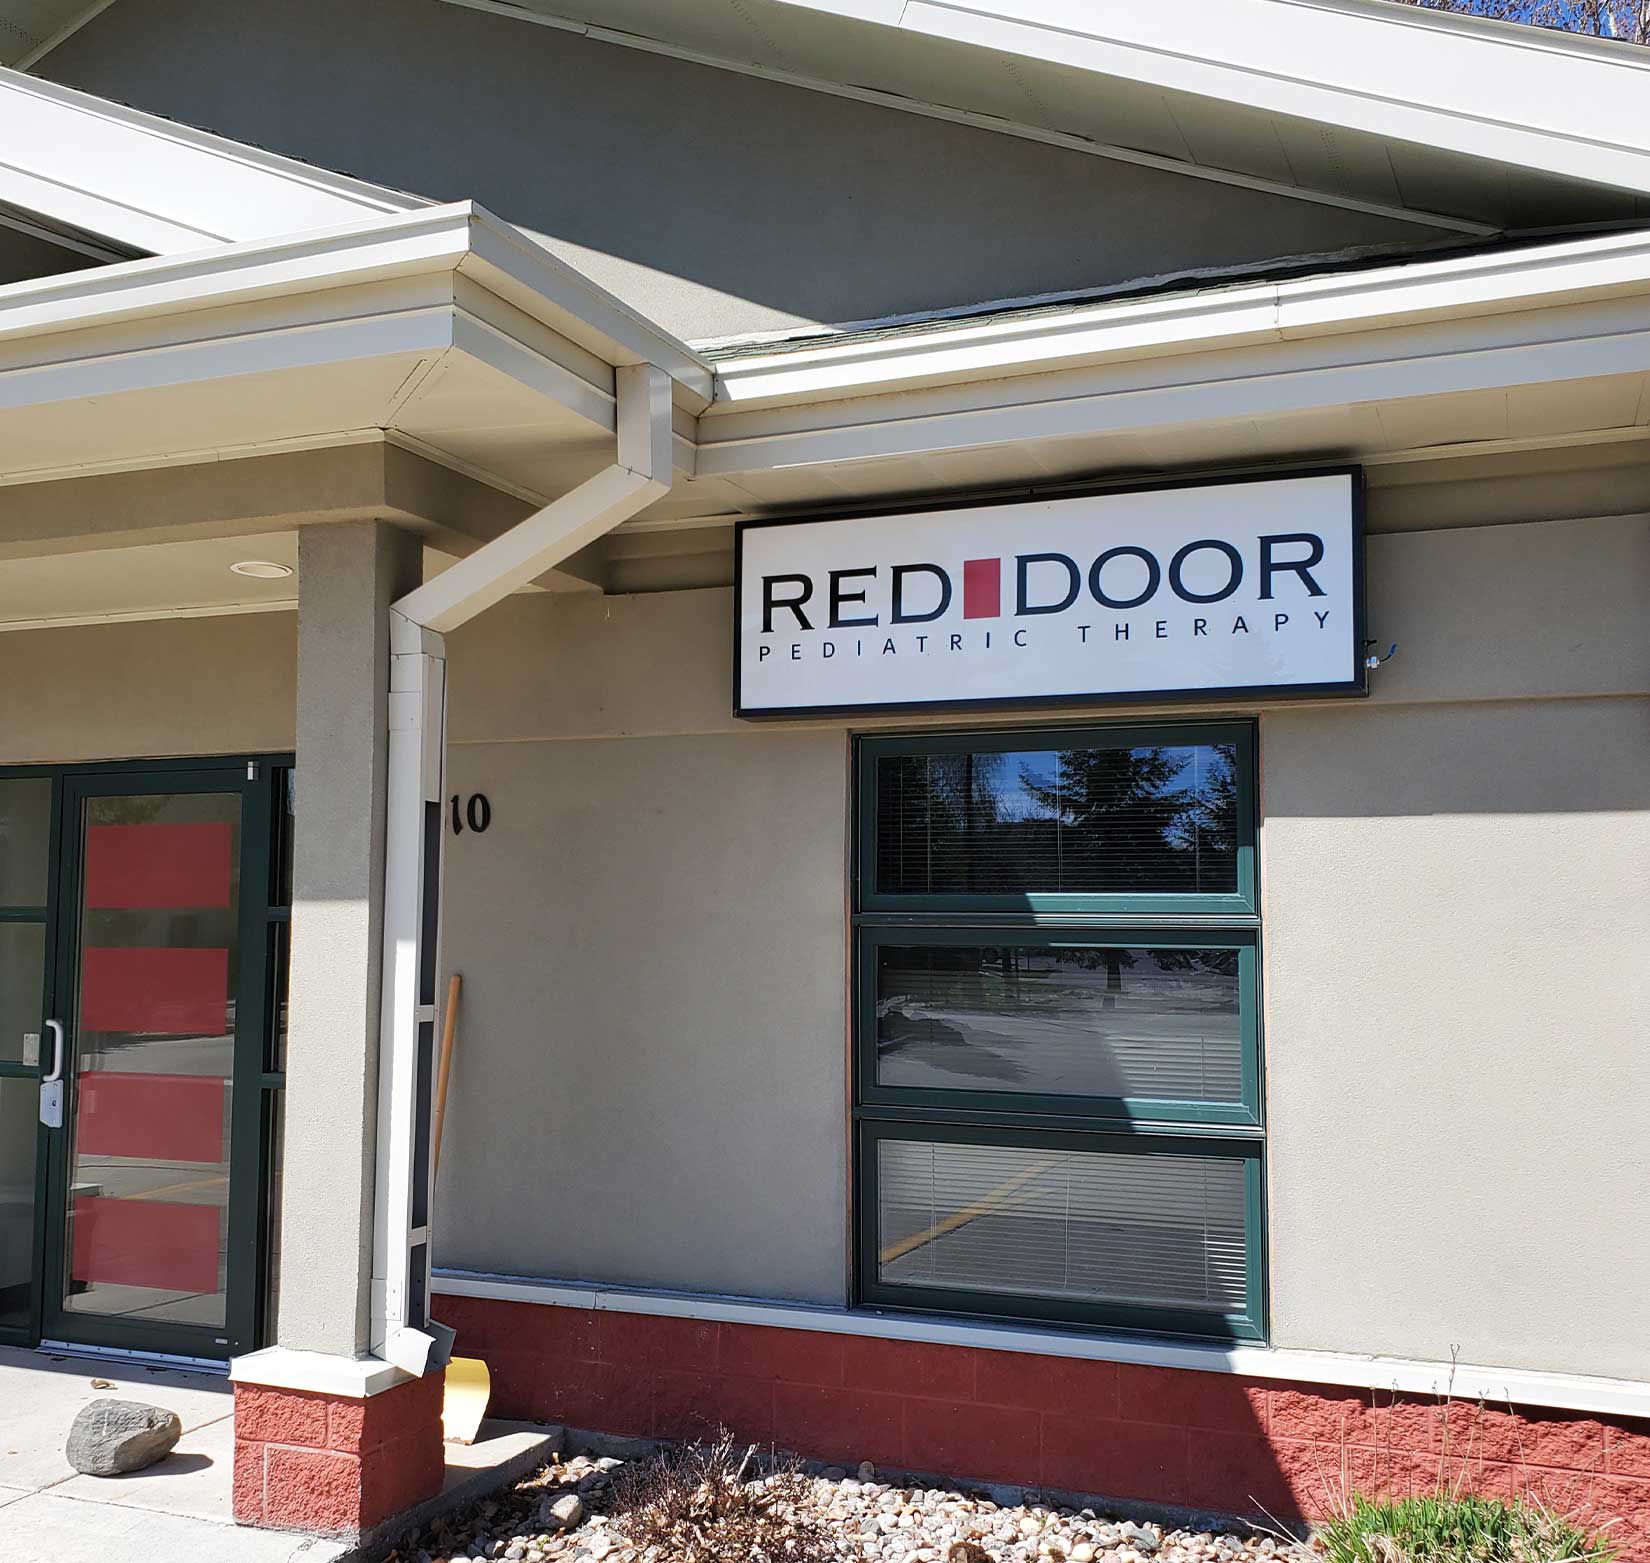 A company sign for Red Door Pediatric Therapy hanging in the front of its building